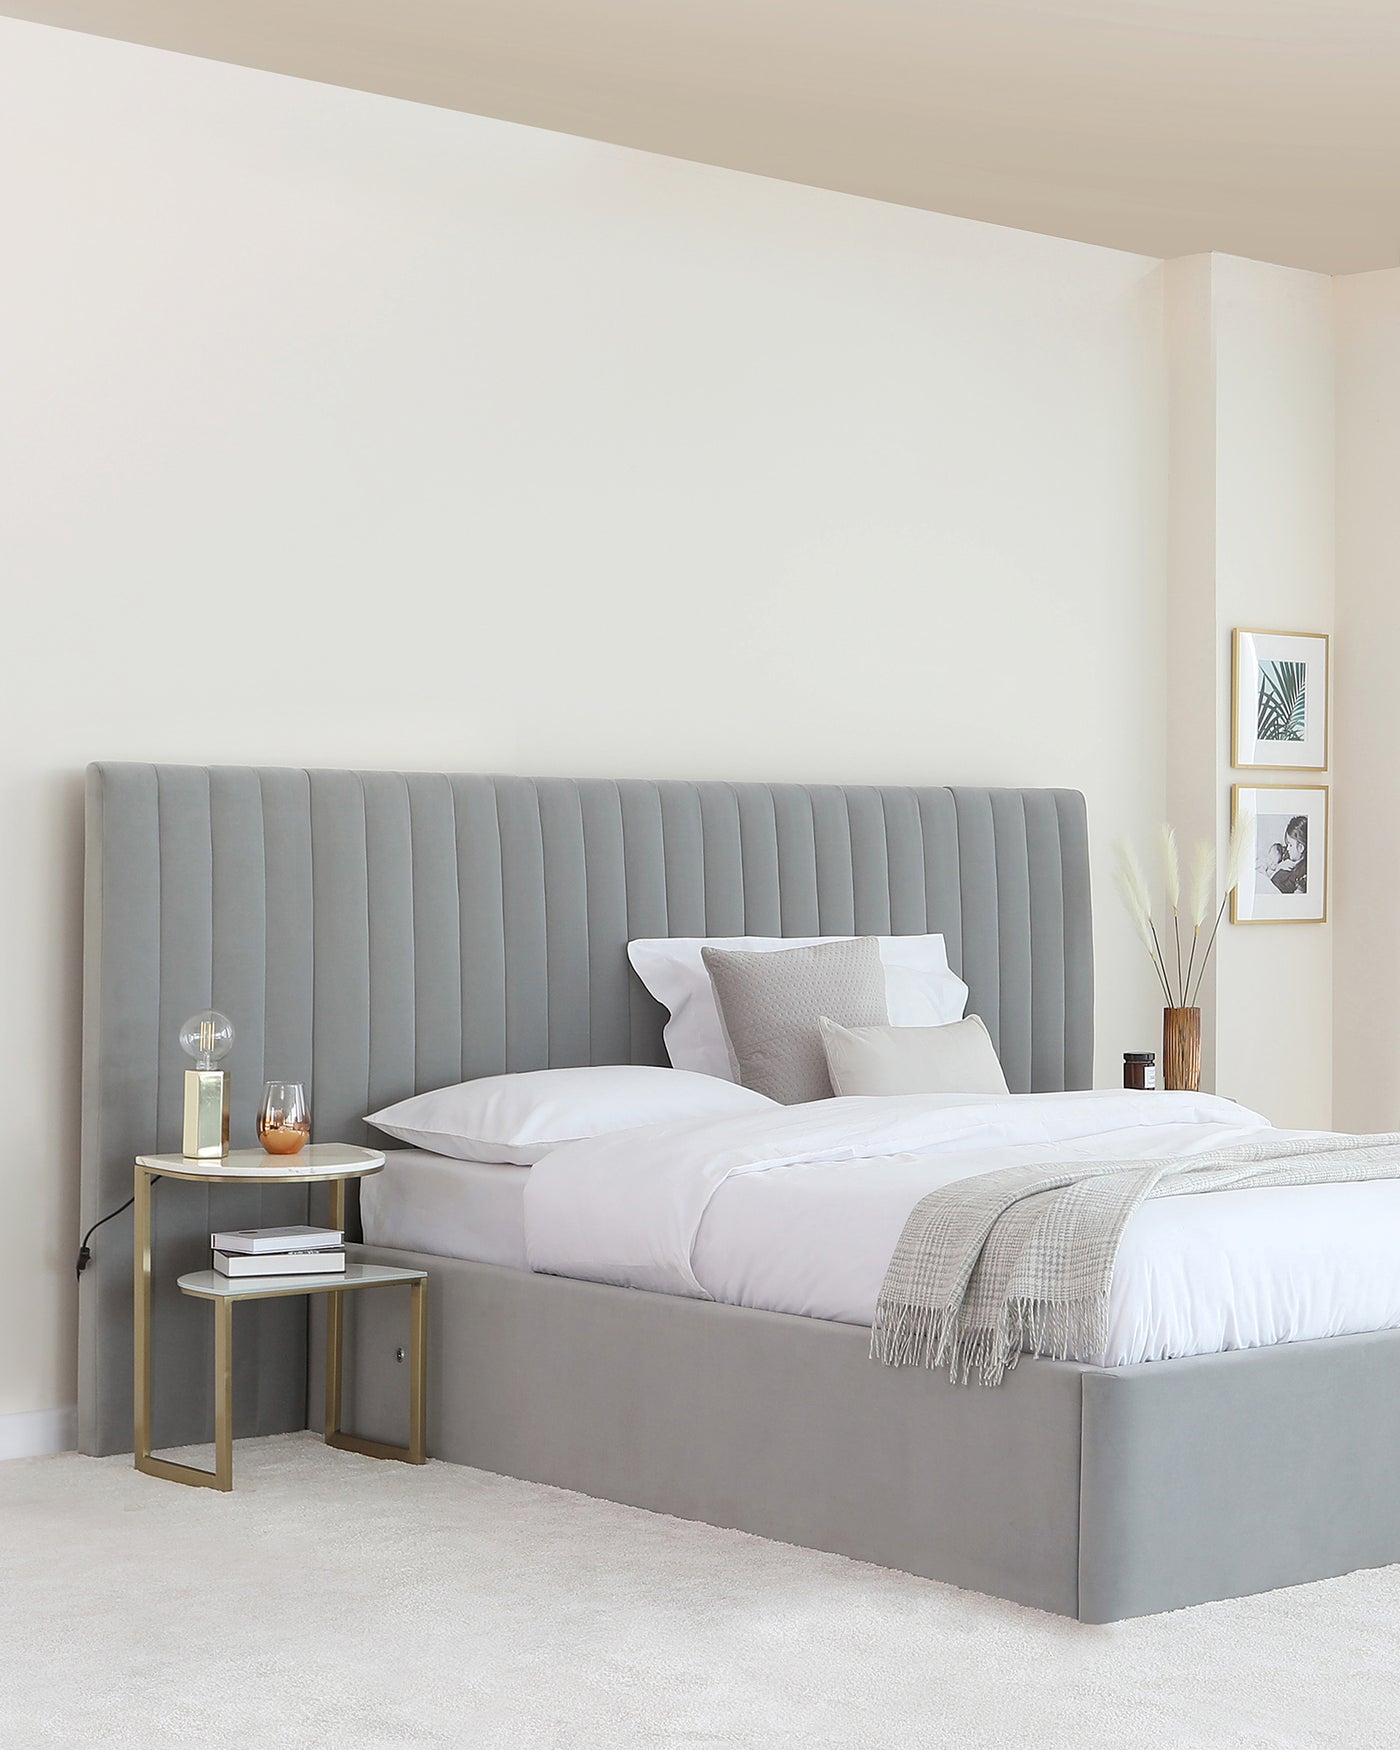 Modern minimalist bedroom furniture featuring a large king-size bed with an upholstered grey headboard in a vertical channel-tufted design. The bed is dressed in white linens, accompanied by a sleek, gold-finished metal side table with a circular top and a smaller rectangular lower shelf. The side table is accessorized with a couple of books, a decorative glass bottle, and a glass with a beverage. The room's decor is complemented by neutral tones and a couple of framed wall art pieces above the side table.